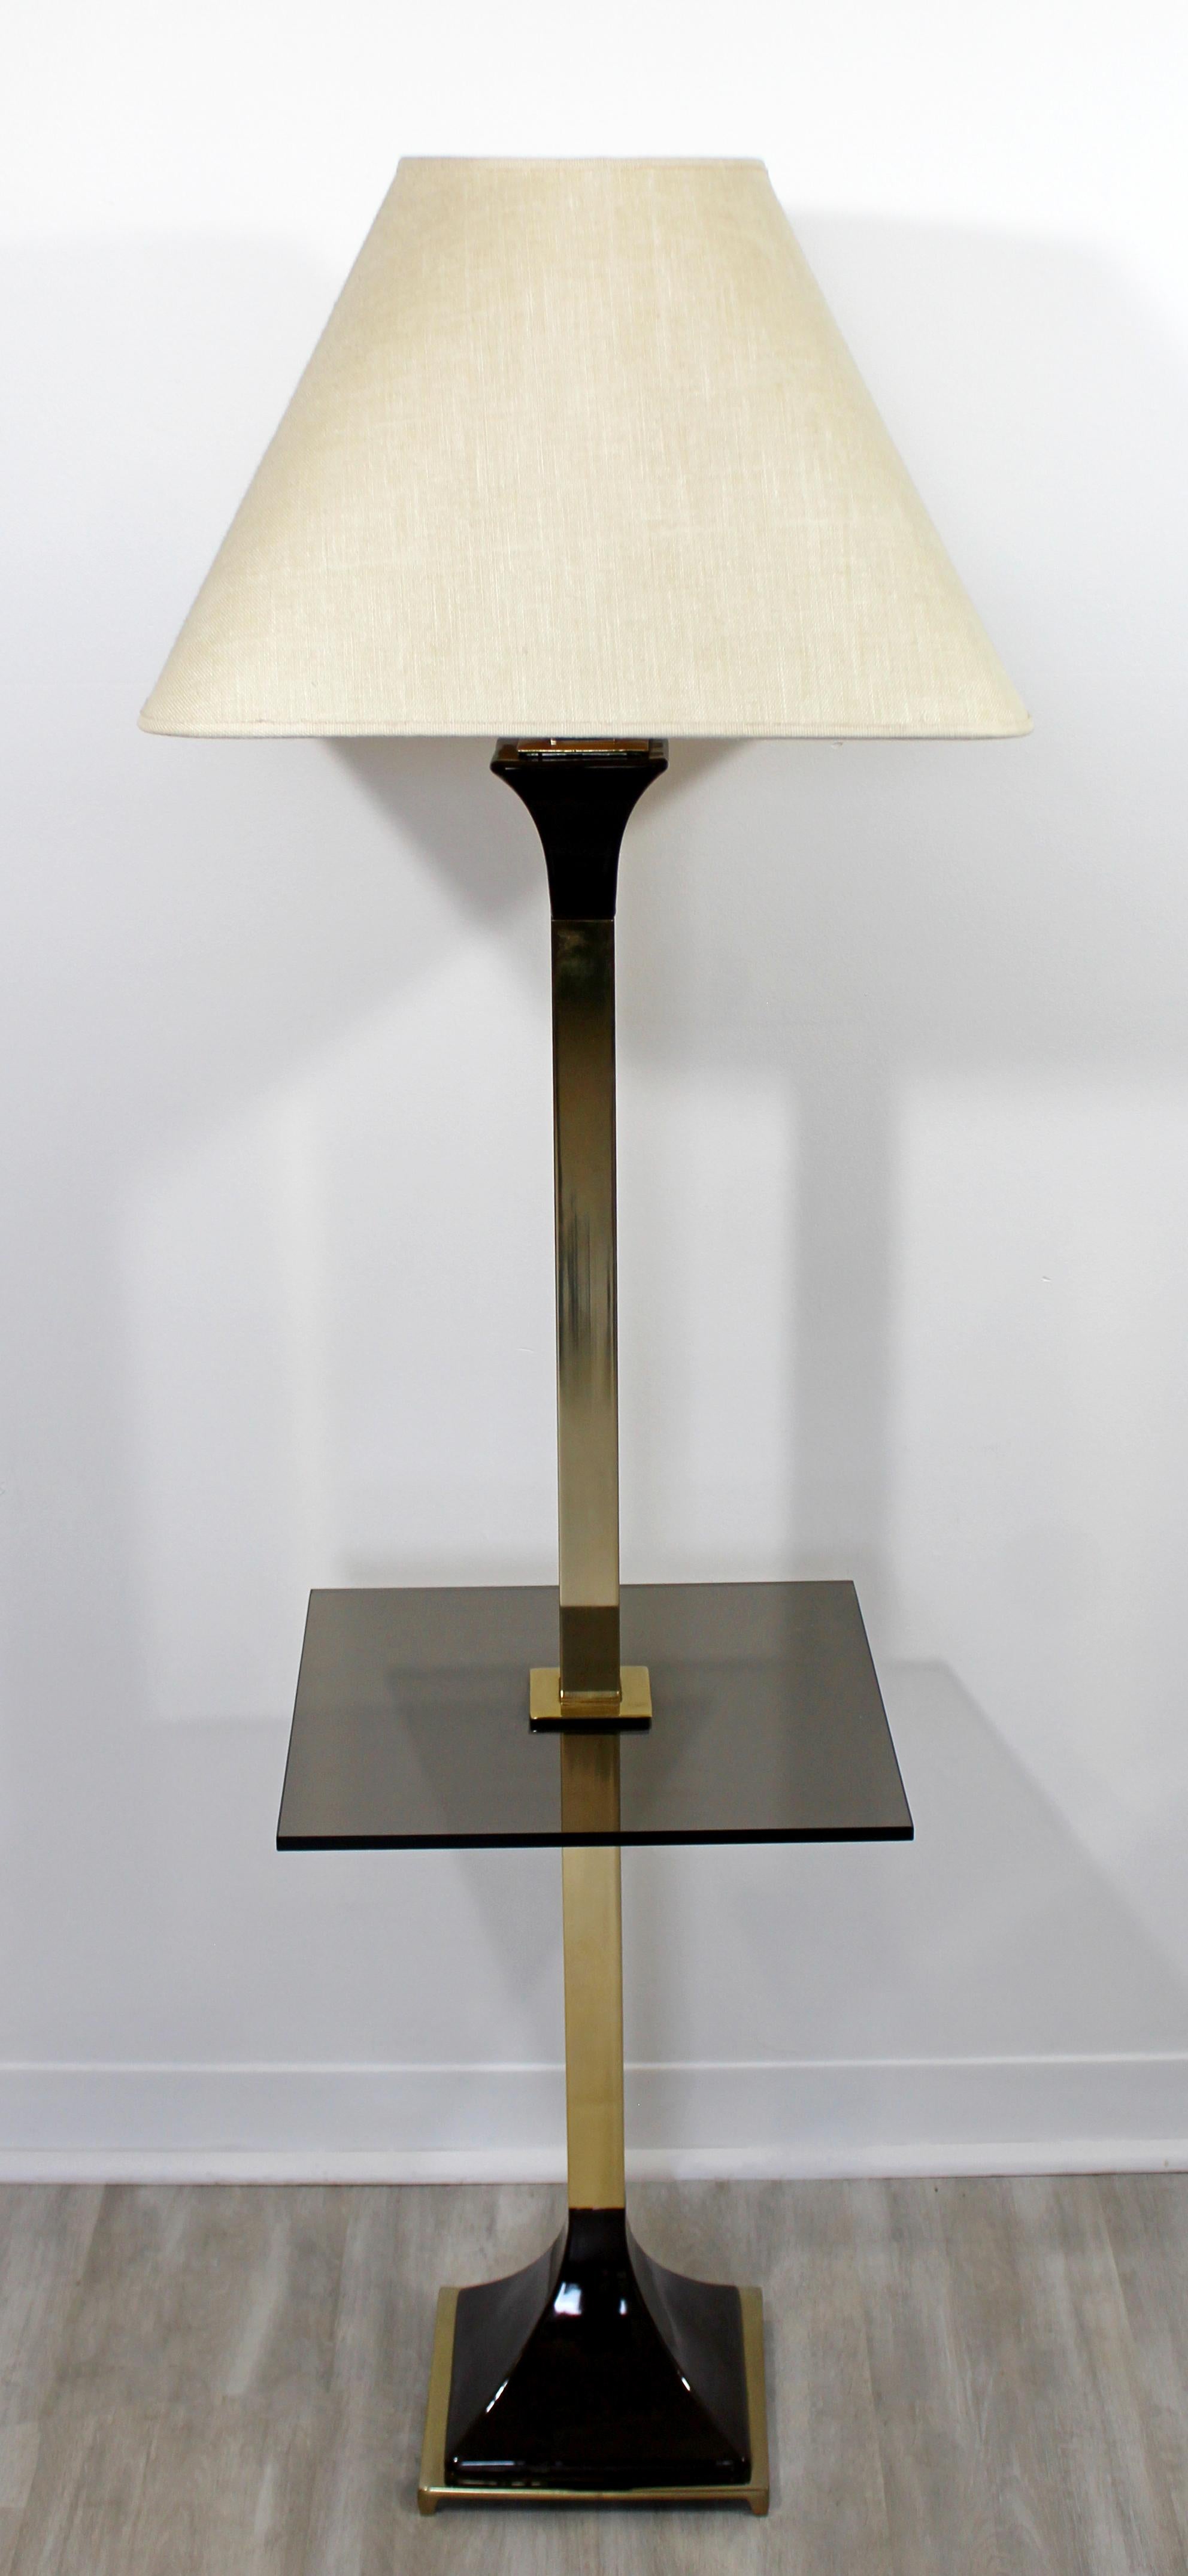 For your consideration is an understated, brass floor lamp, with a square glass table attached, and brown porcelain accents, by the Laurel Lamp Company, circa 1970s. Includes original shade and finial. In excellent vintage condition. The dimensions